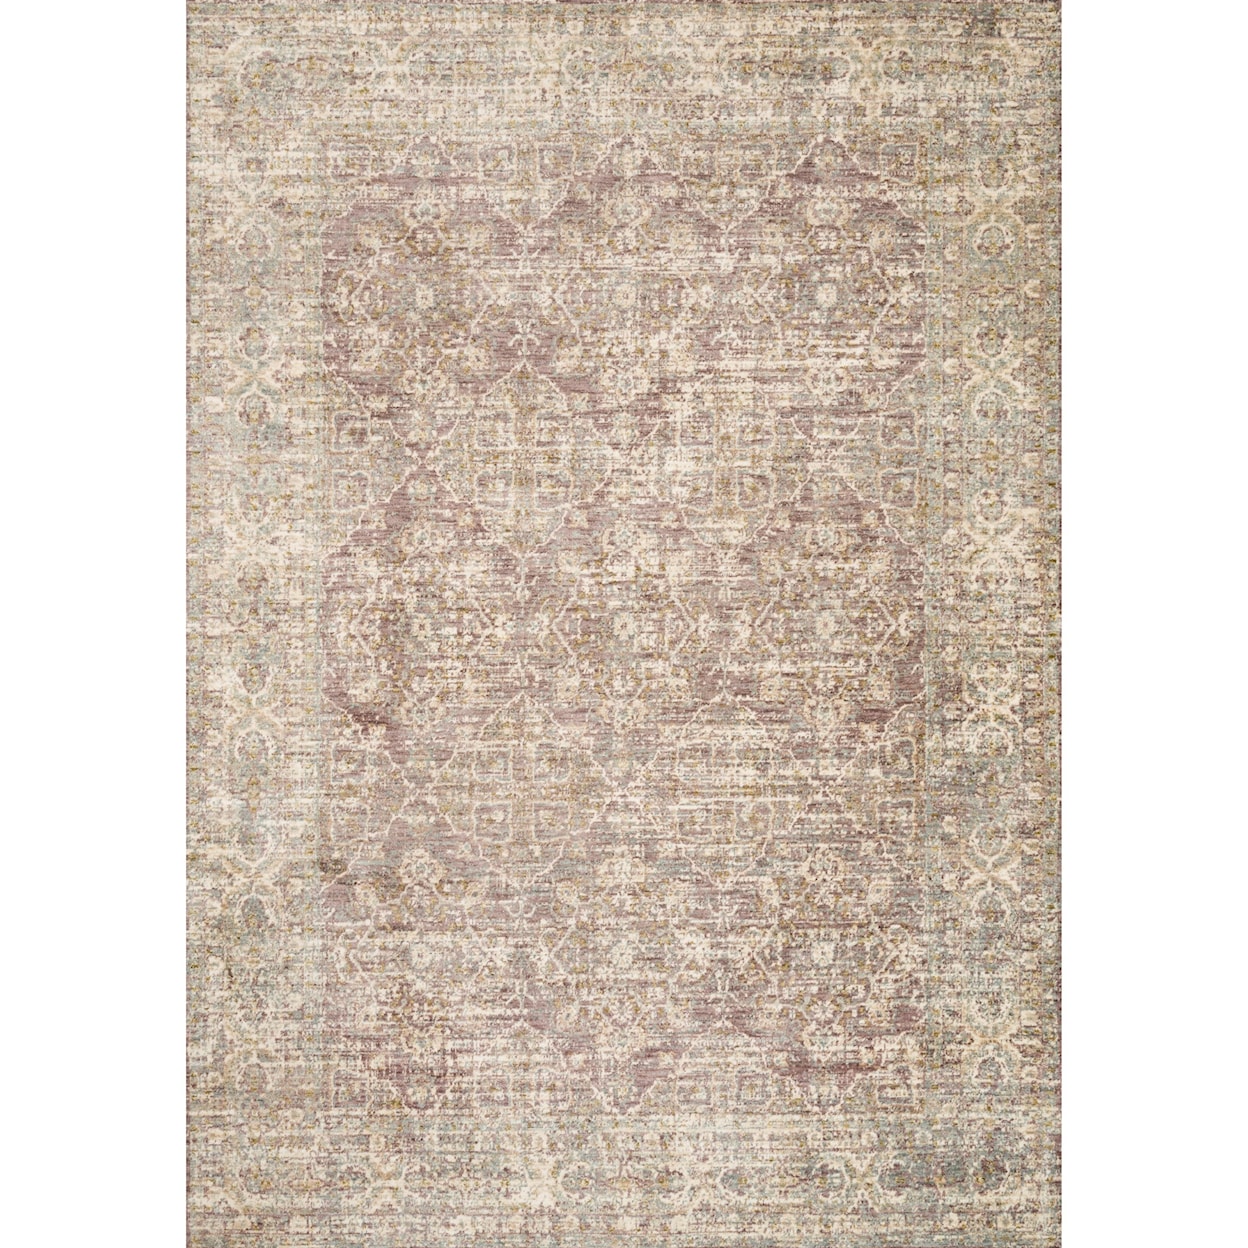 Reeds Rugs Revere 9'6" x 12'5" Lilac Rug